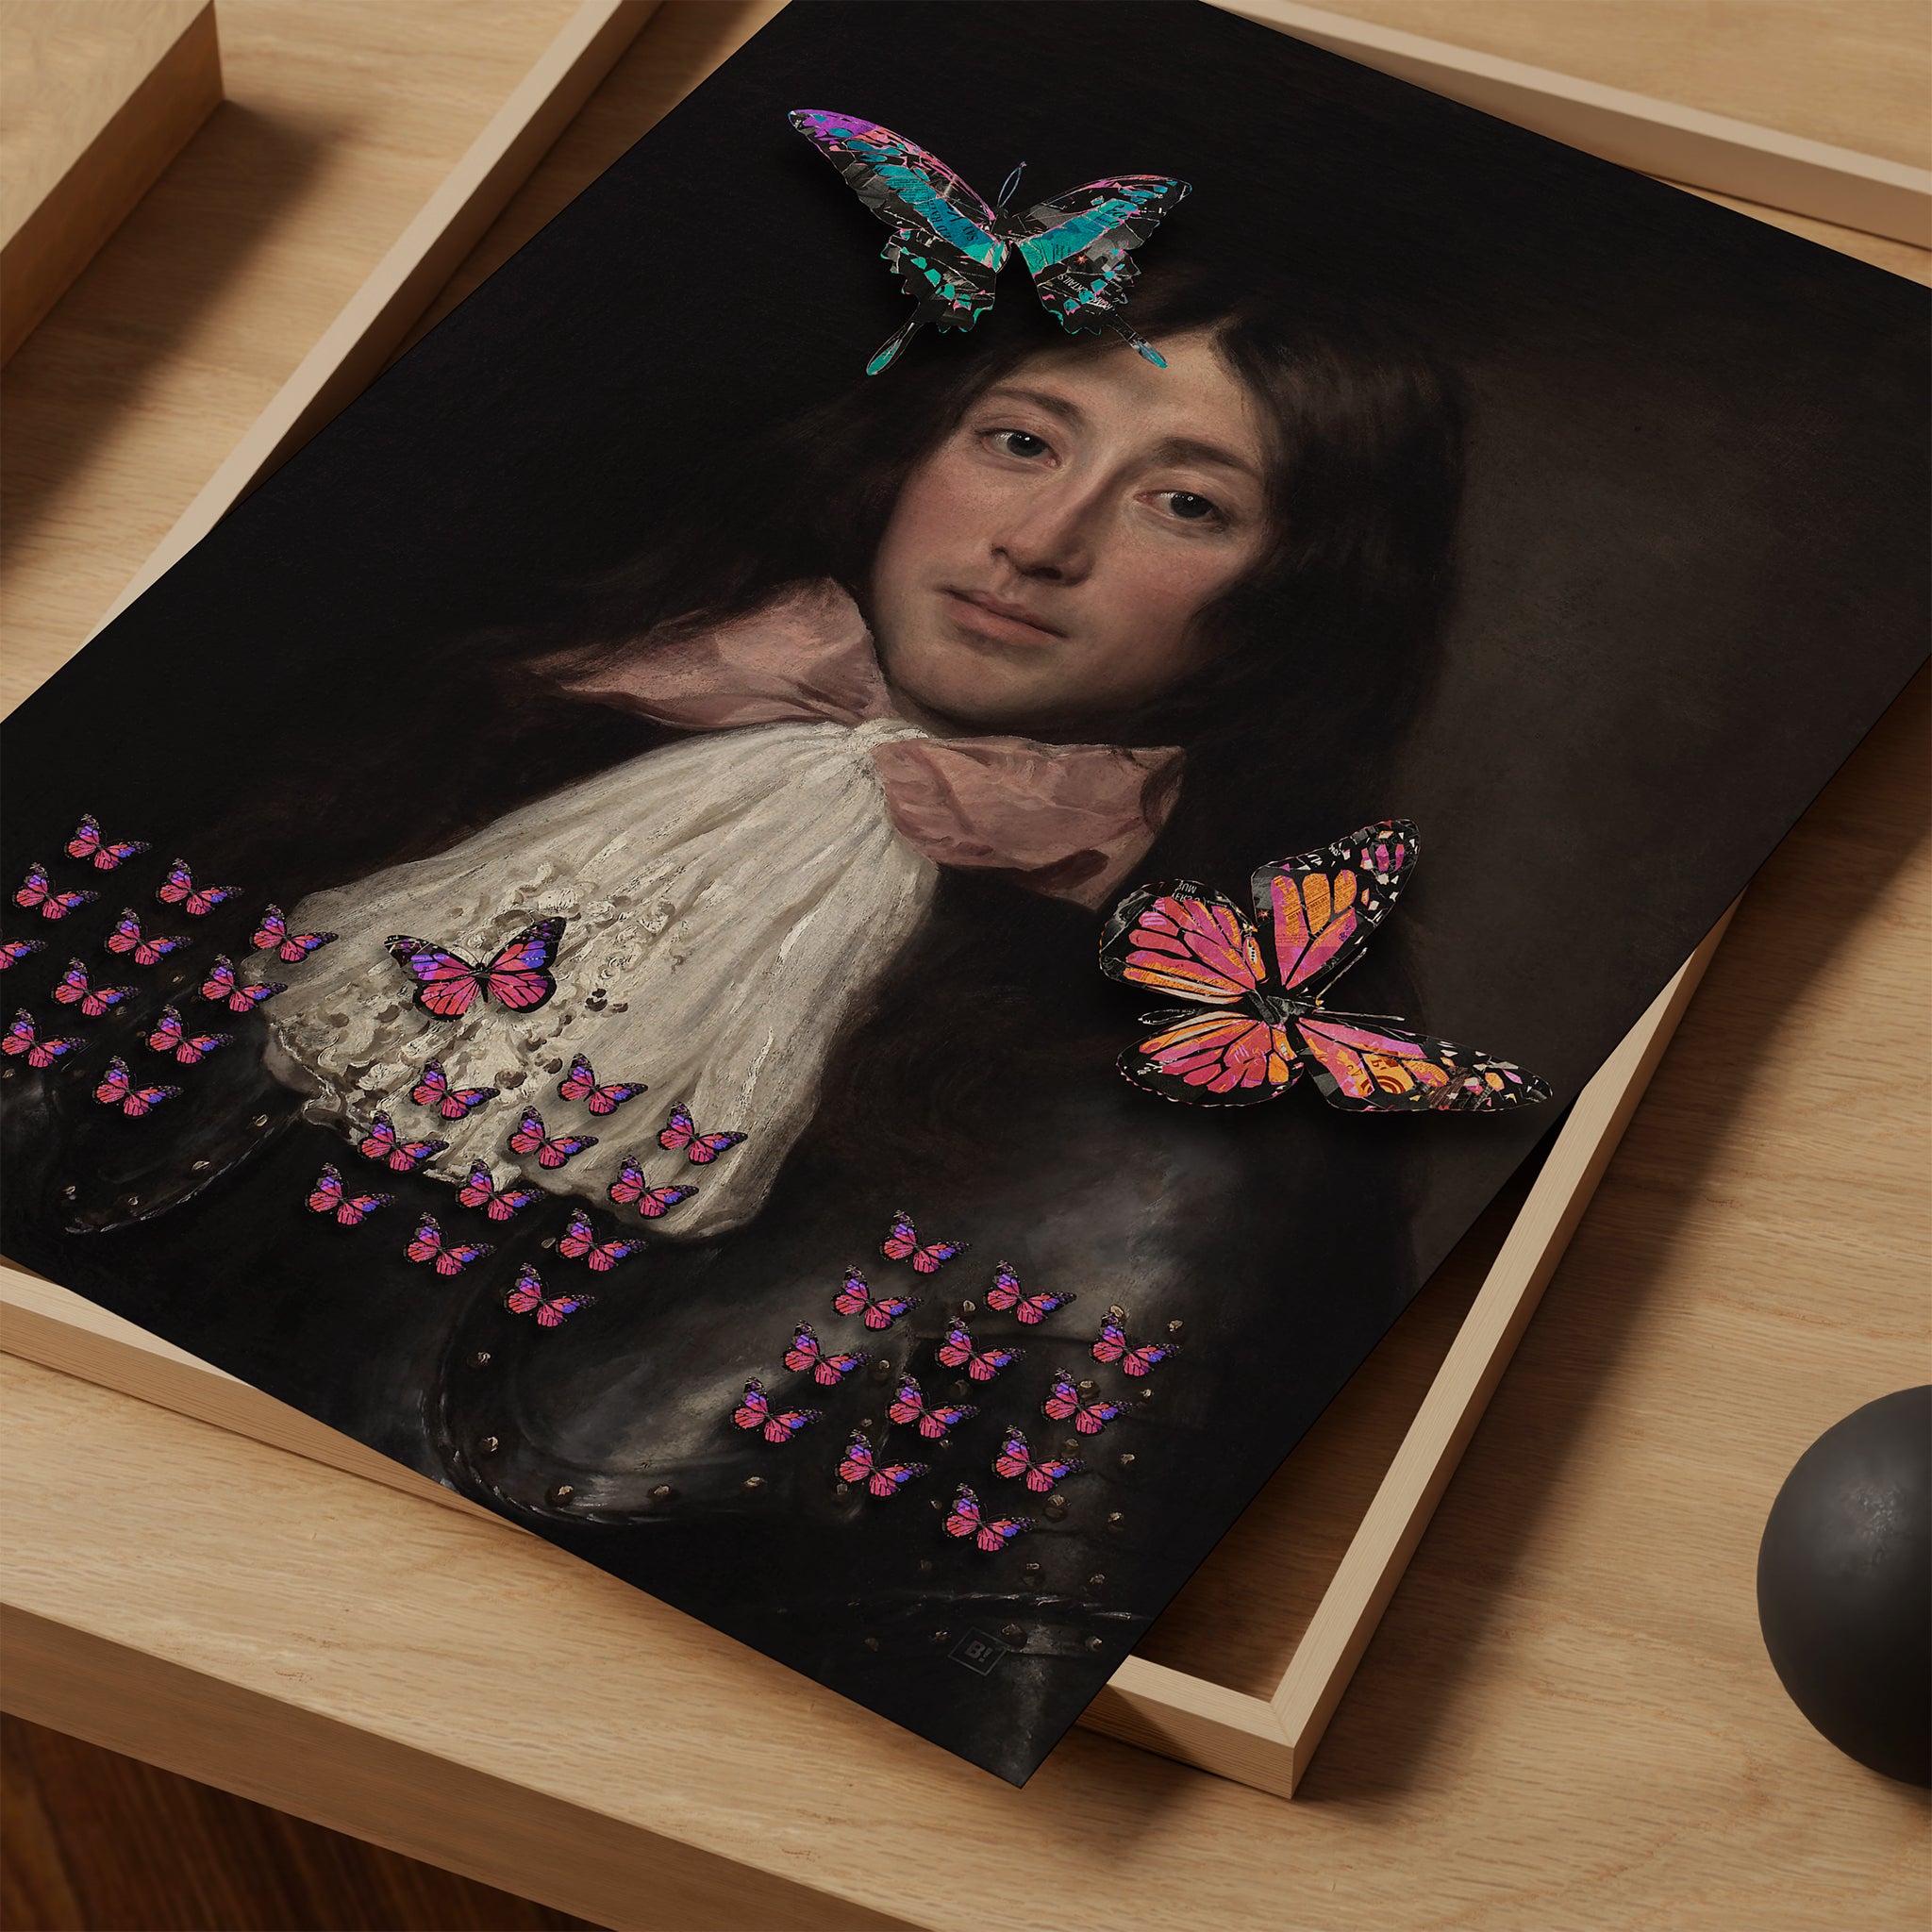 Be inspired by our altered soldier with pink tie and butterflies art print. This artwork was printed using giclée on archival acid-free paper and is presented as a print close-up that captures its timeless beauty in every detail.